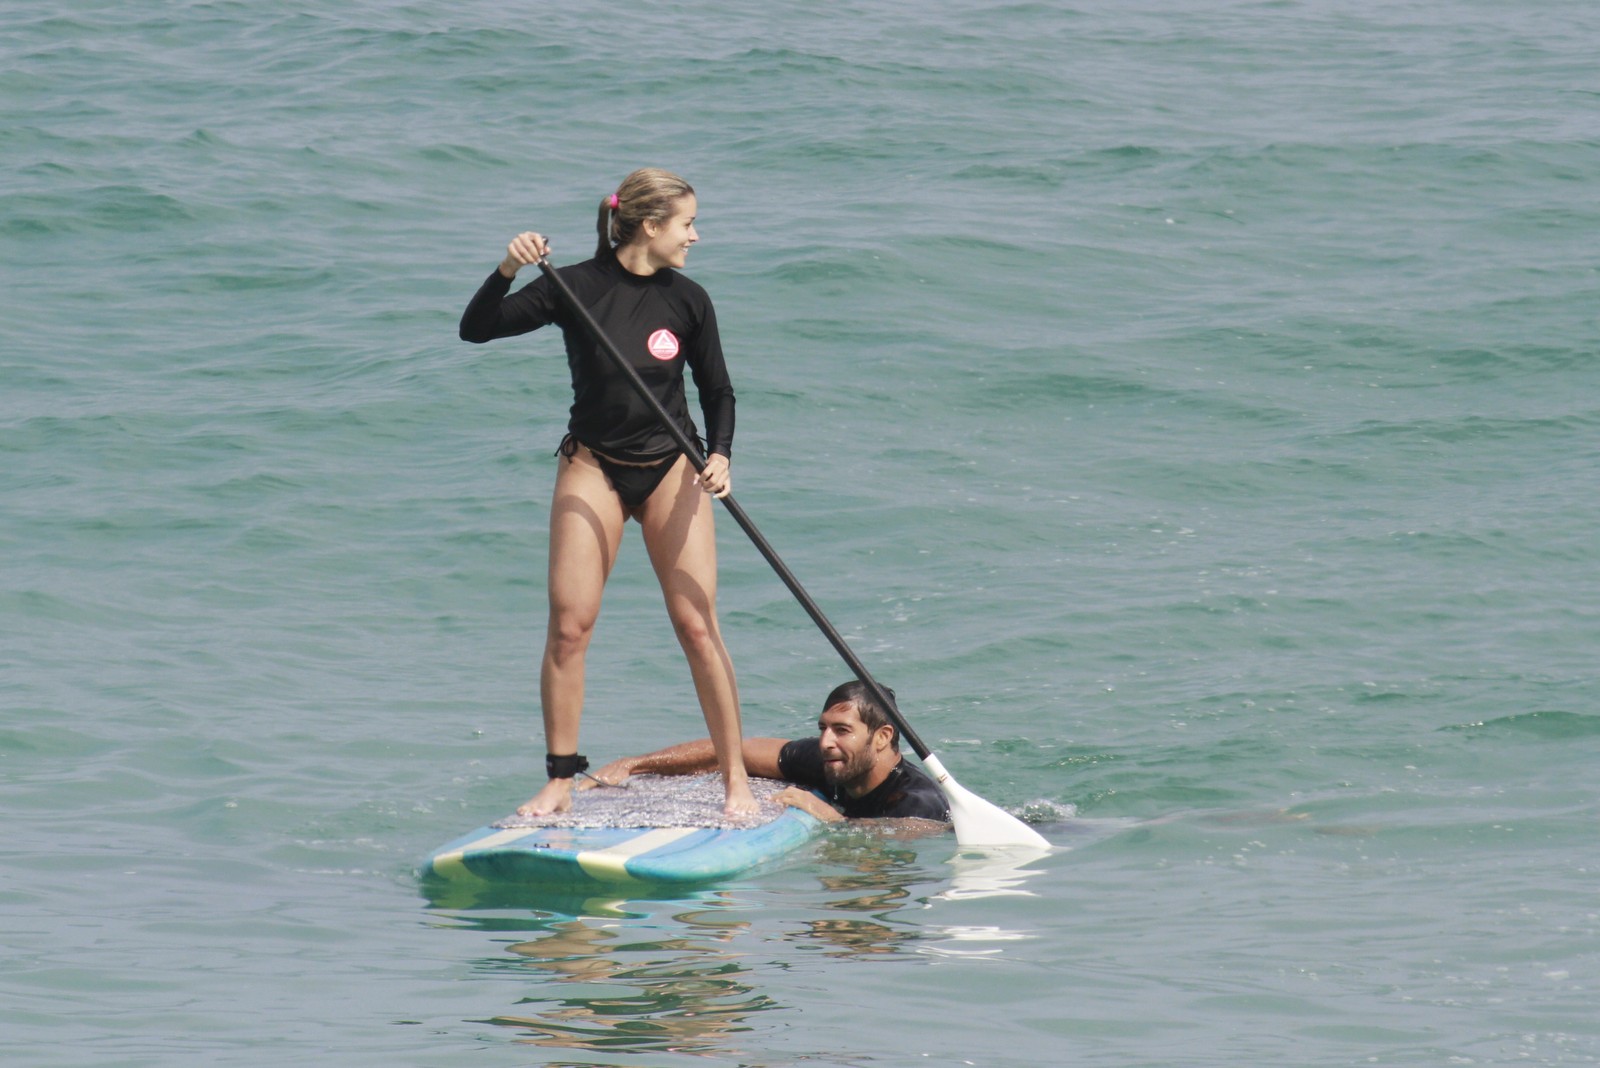  Aryane Steinkopf se arriscou no stand up paddle